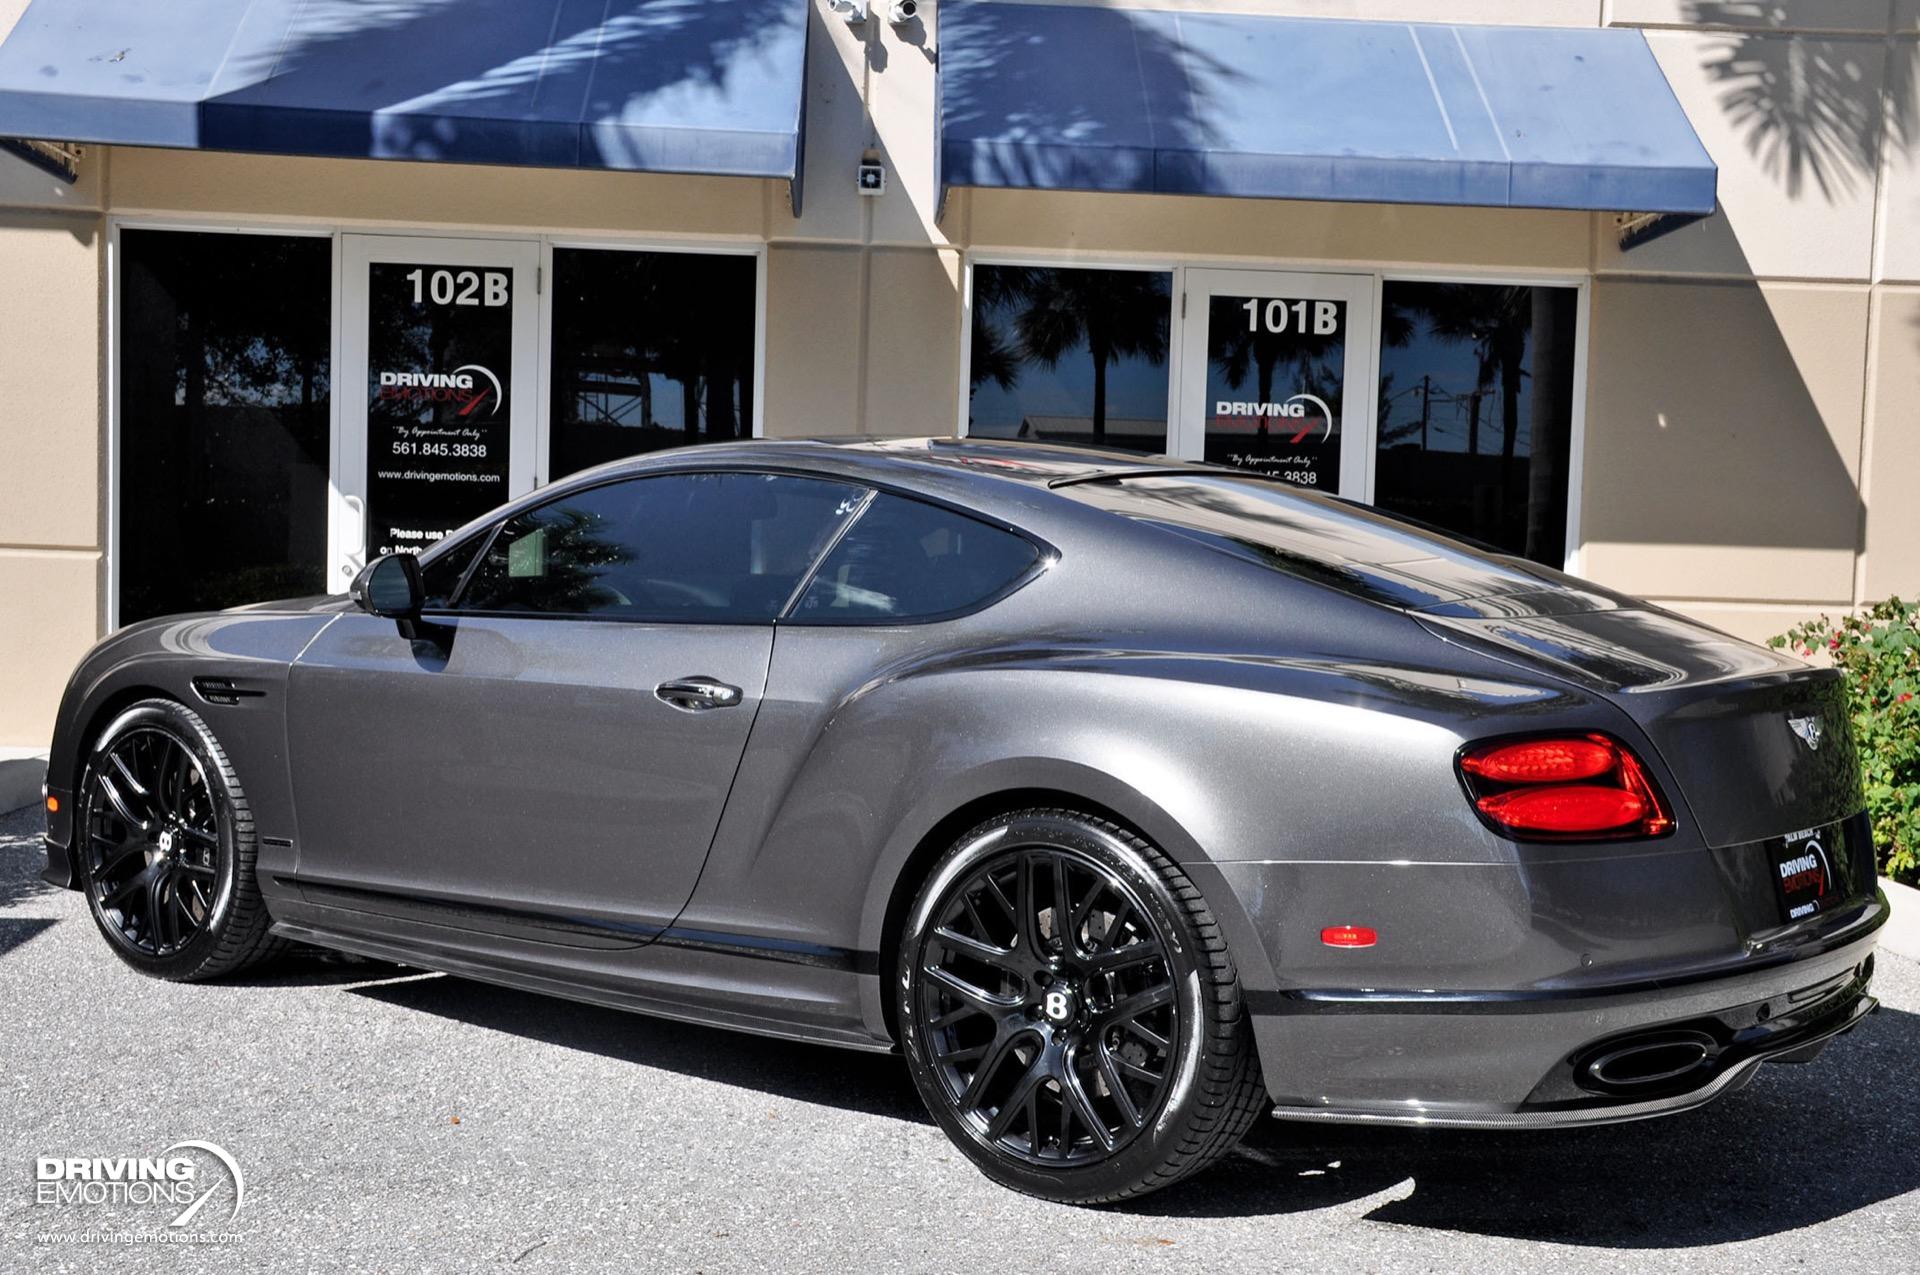 Used 2017 Bentley Continental GT Supersports W12 Supersports 1 OF 710 BUILT! TITANIUM EXHAUST! $332K MSRP!! | Lake Park, FL